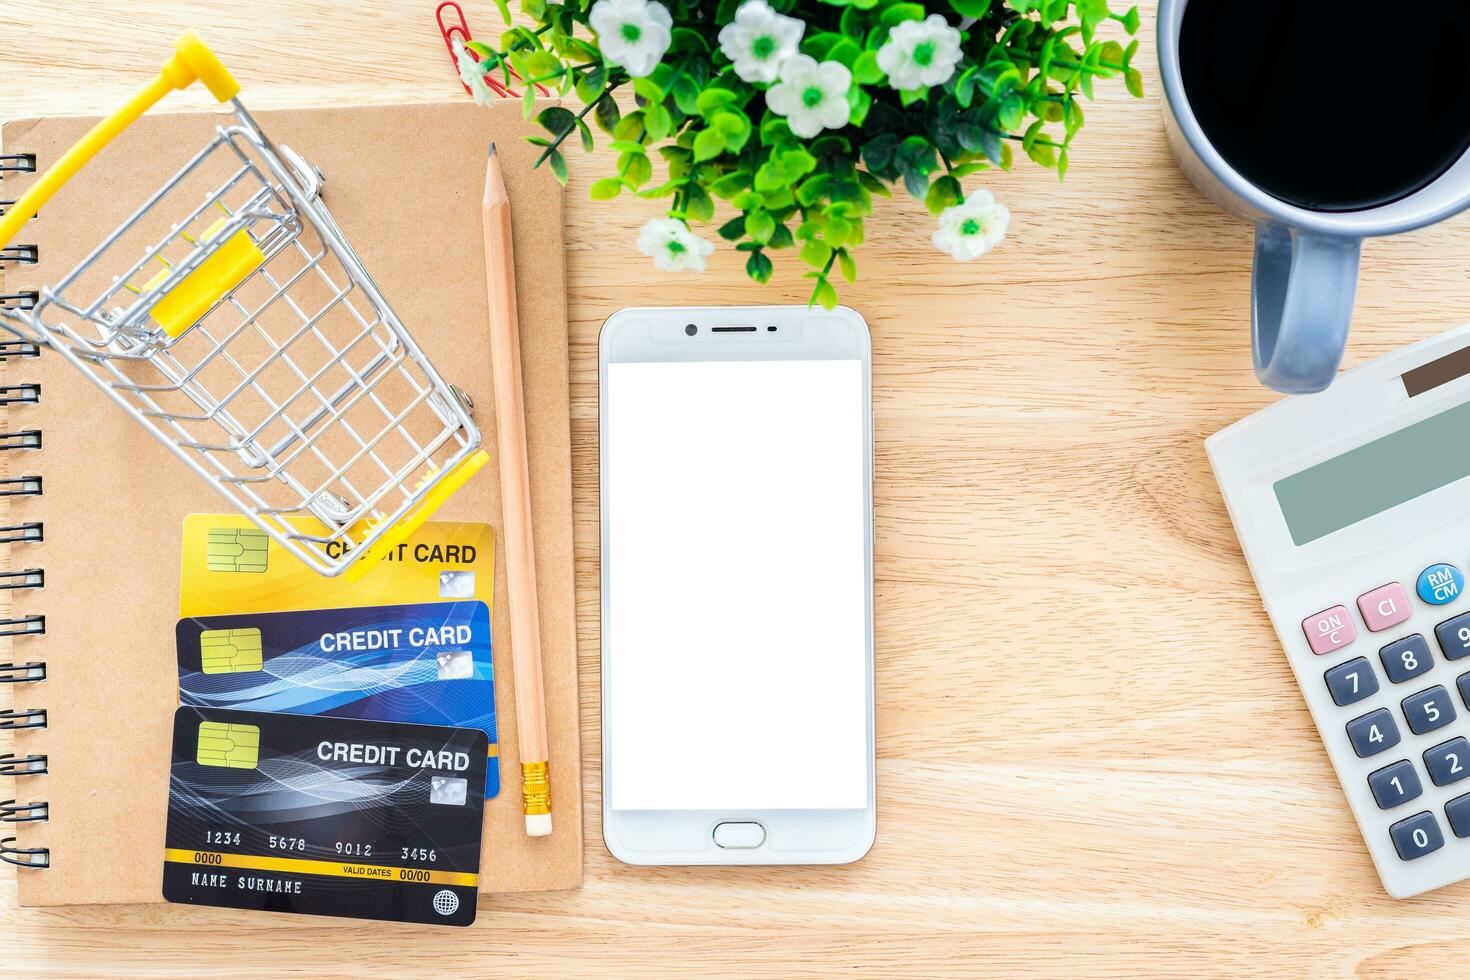 Credit cards,notebook,flower pot tree,smartphone,Shopping cart and coffee cup on wooden background,Online banking Concept,Top view office table. photo